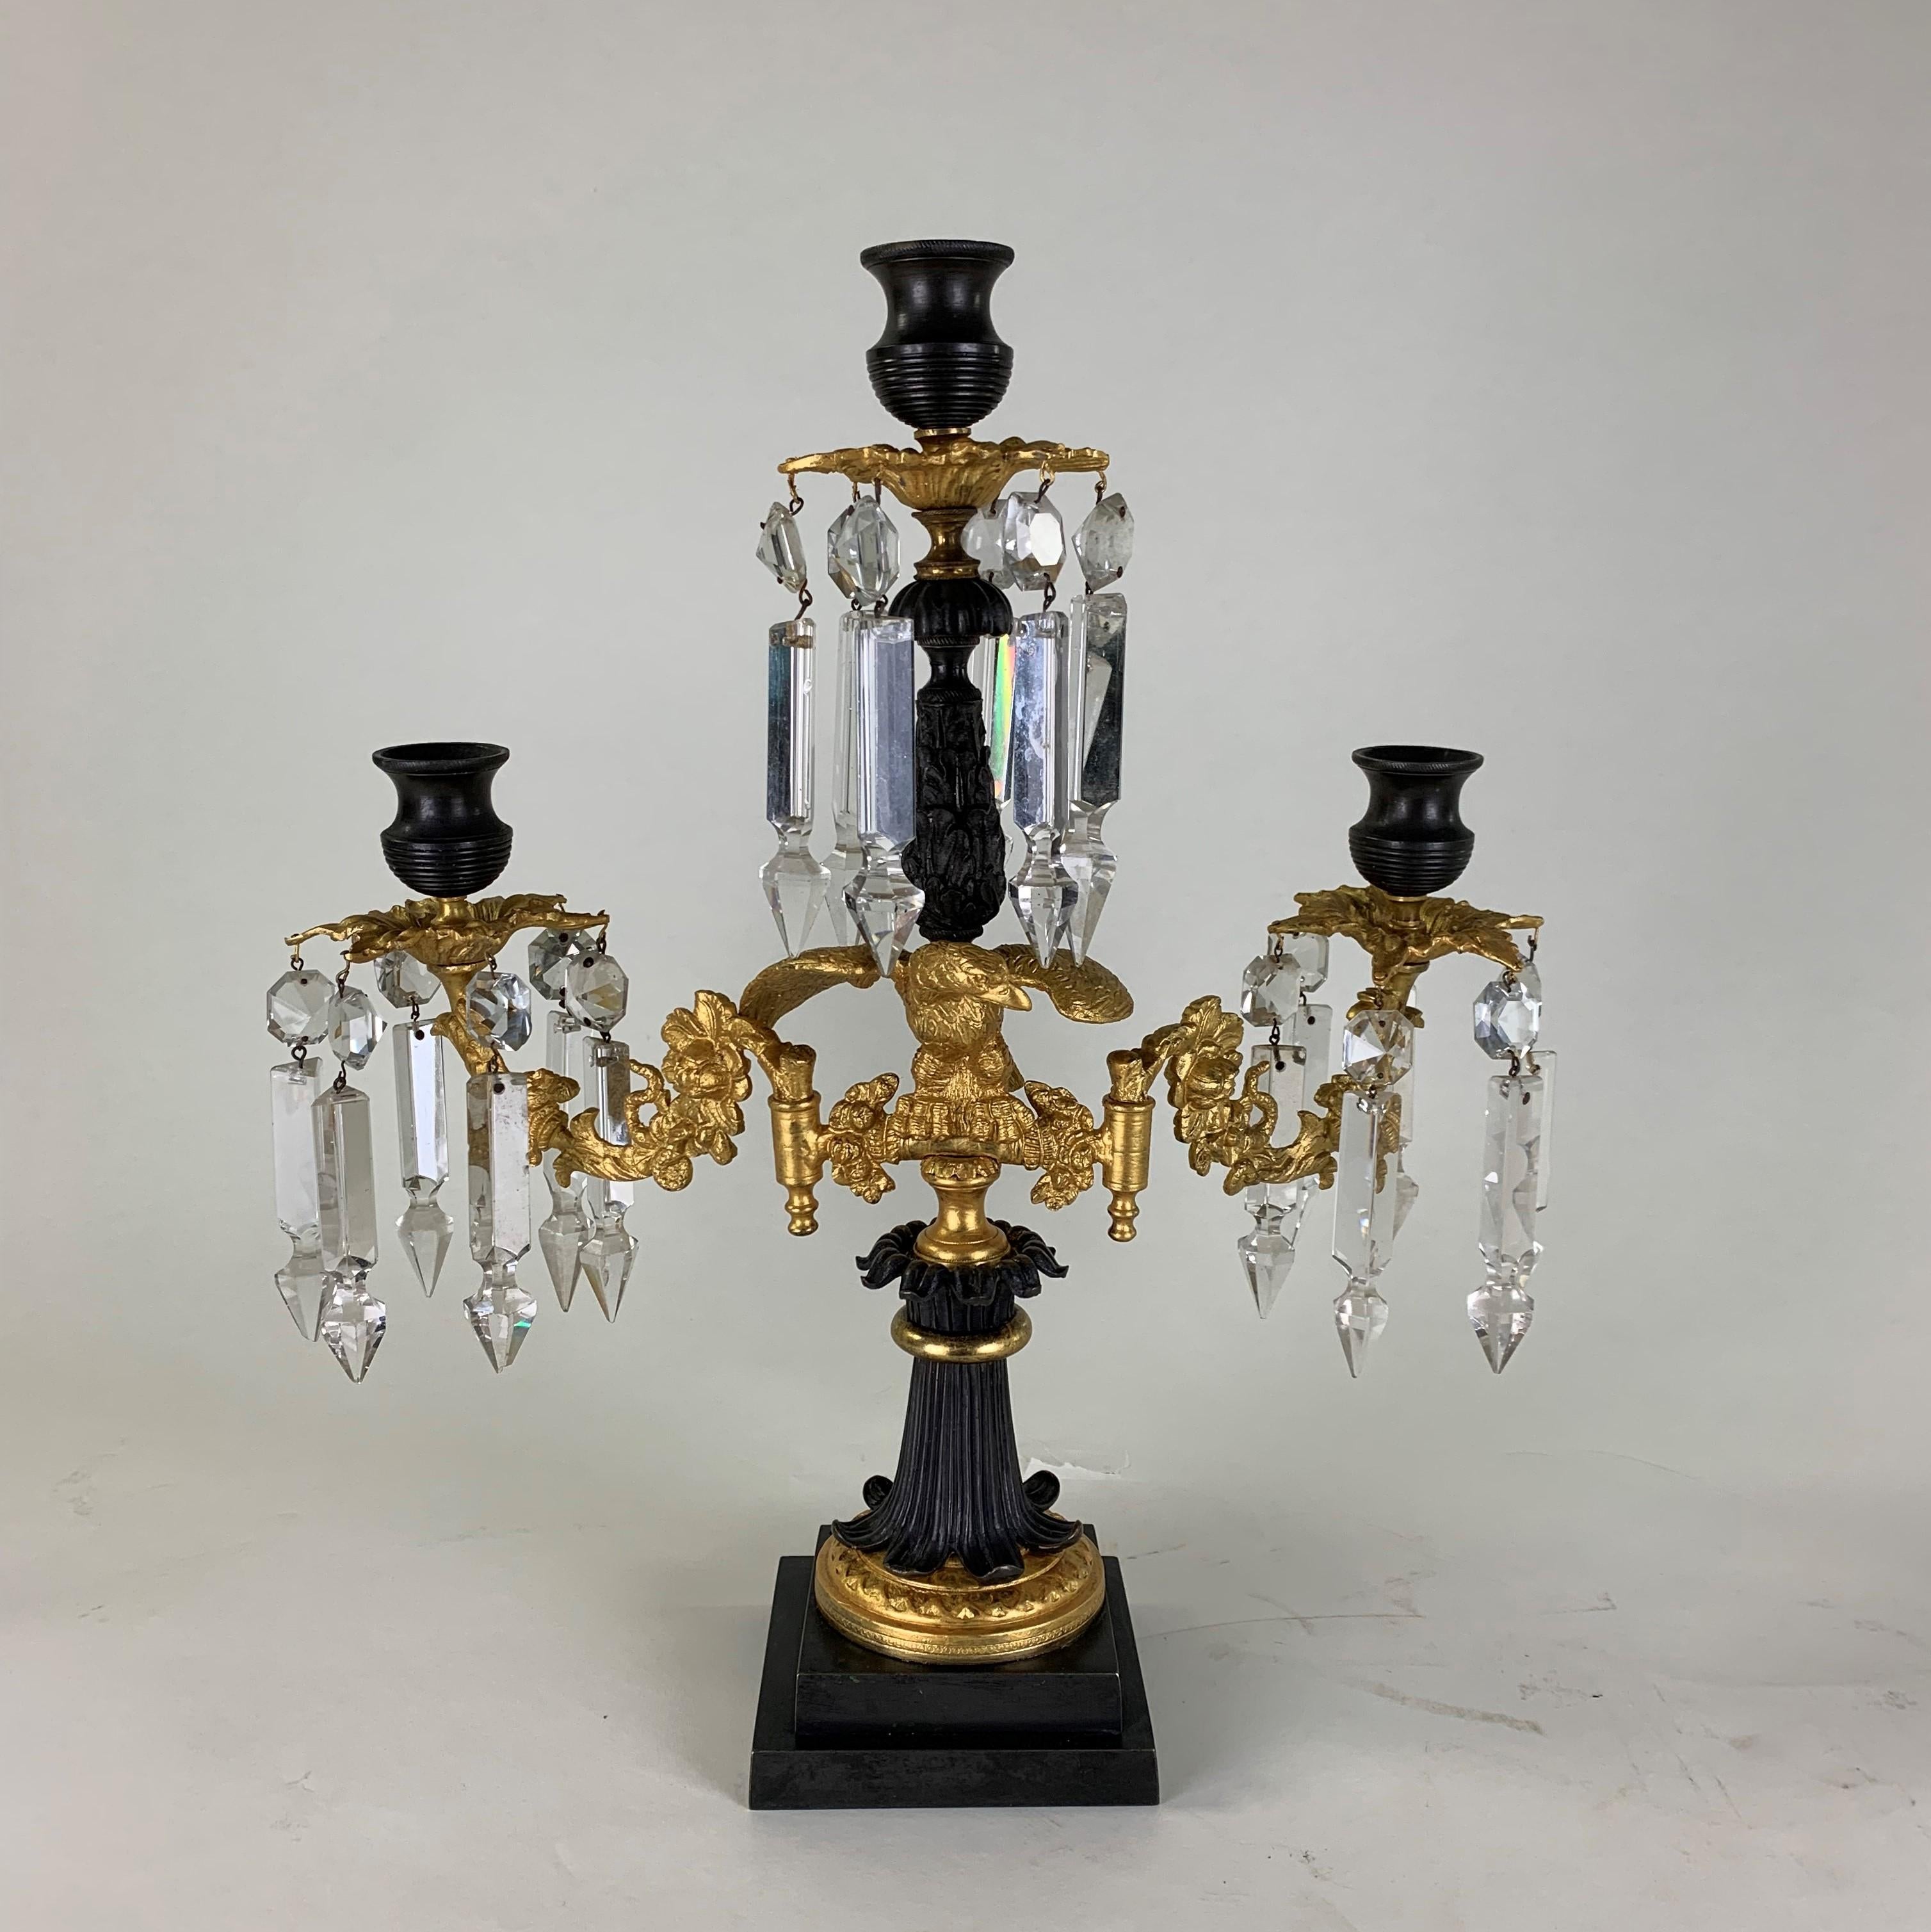 A very fine quality early 19th century English bronze & ormolu three branch candelabra. Each branch has a shaped bronze candleholder above gilded drip pans adorned with prismatic cut-glass drops. set on a central gilt eagle with outstretched wings